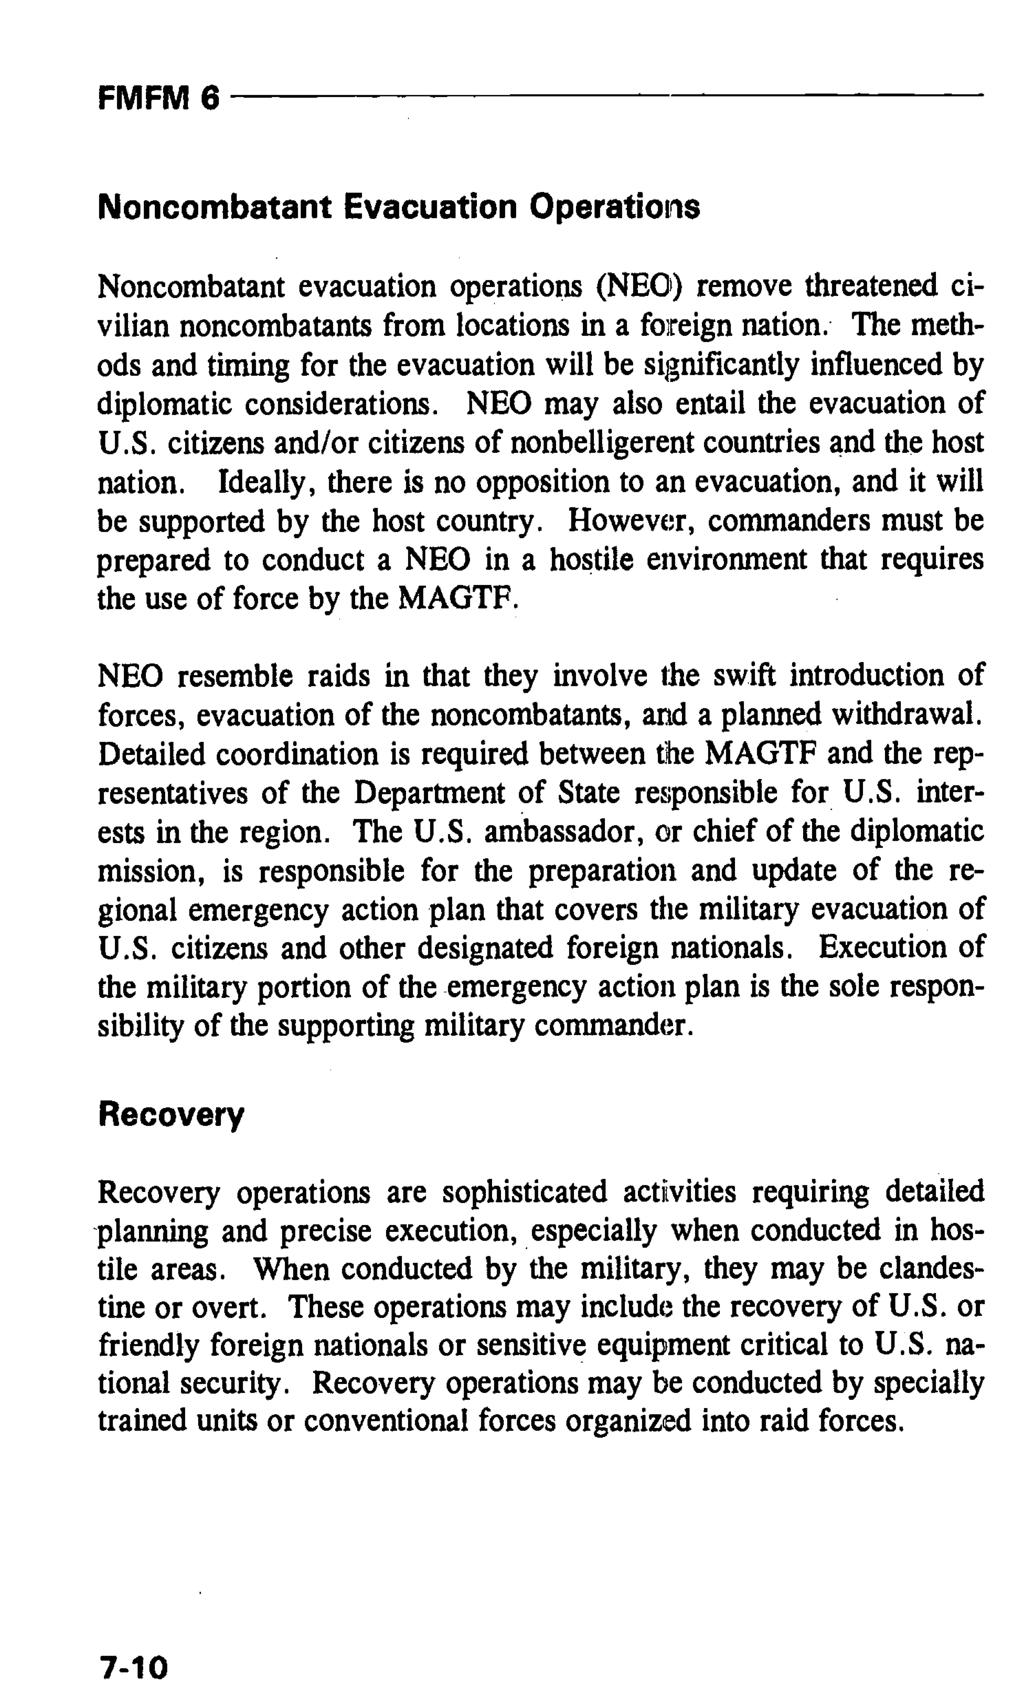 FMFM6 Noncombatant Evacuation Operations Noncombatant evacuation operations (NEC) remove threatened civilian noncombatants from locations in a foreign nation; The methods and timing for the